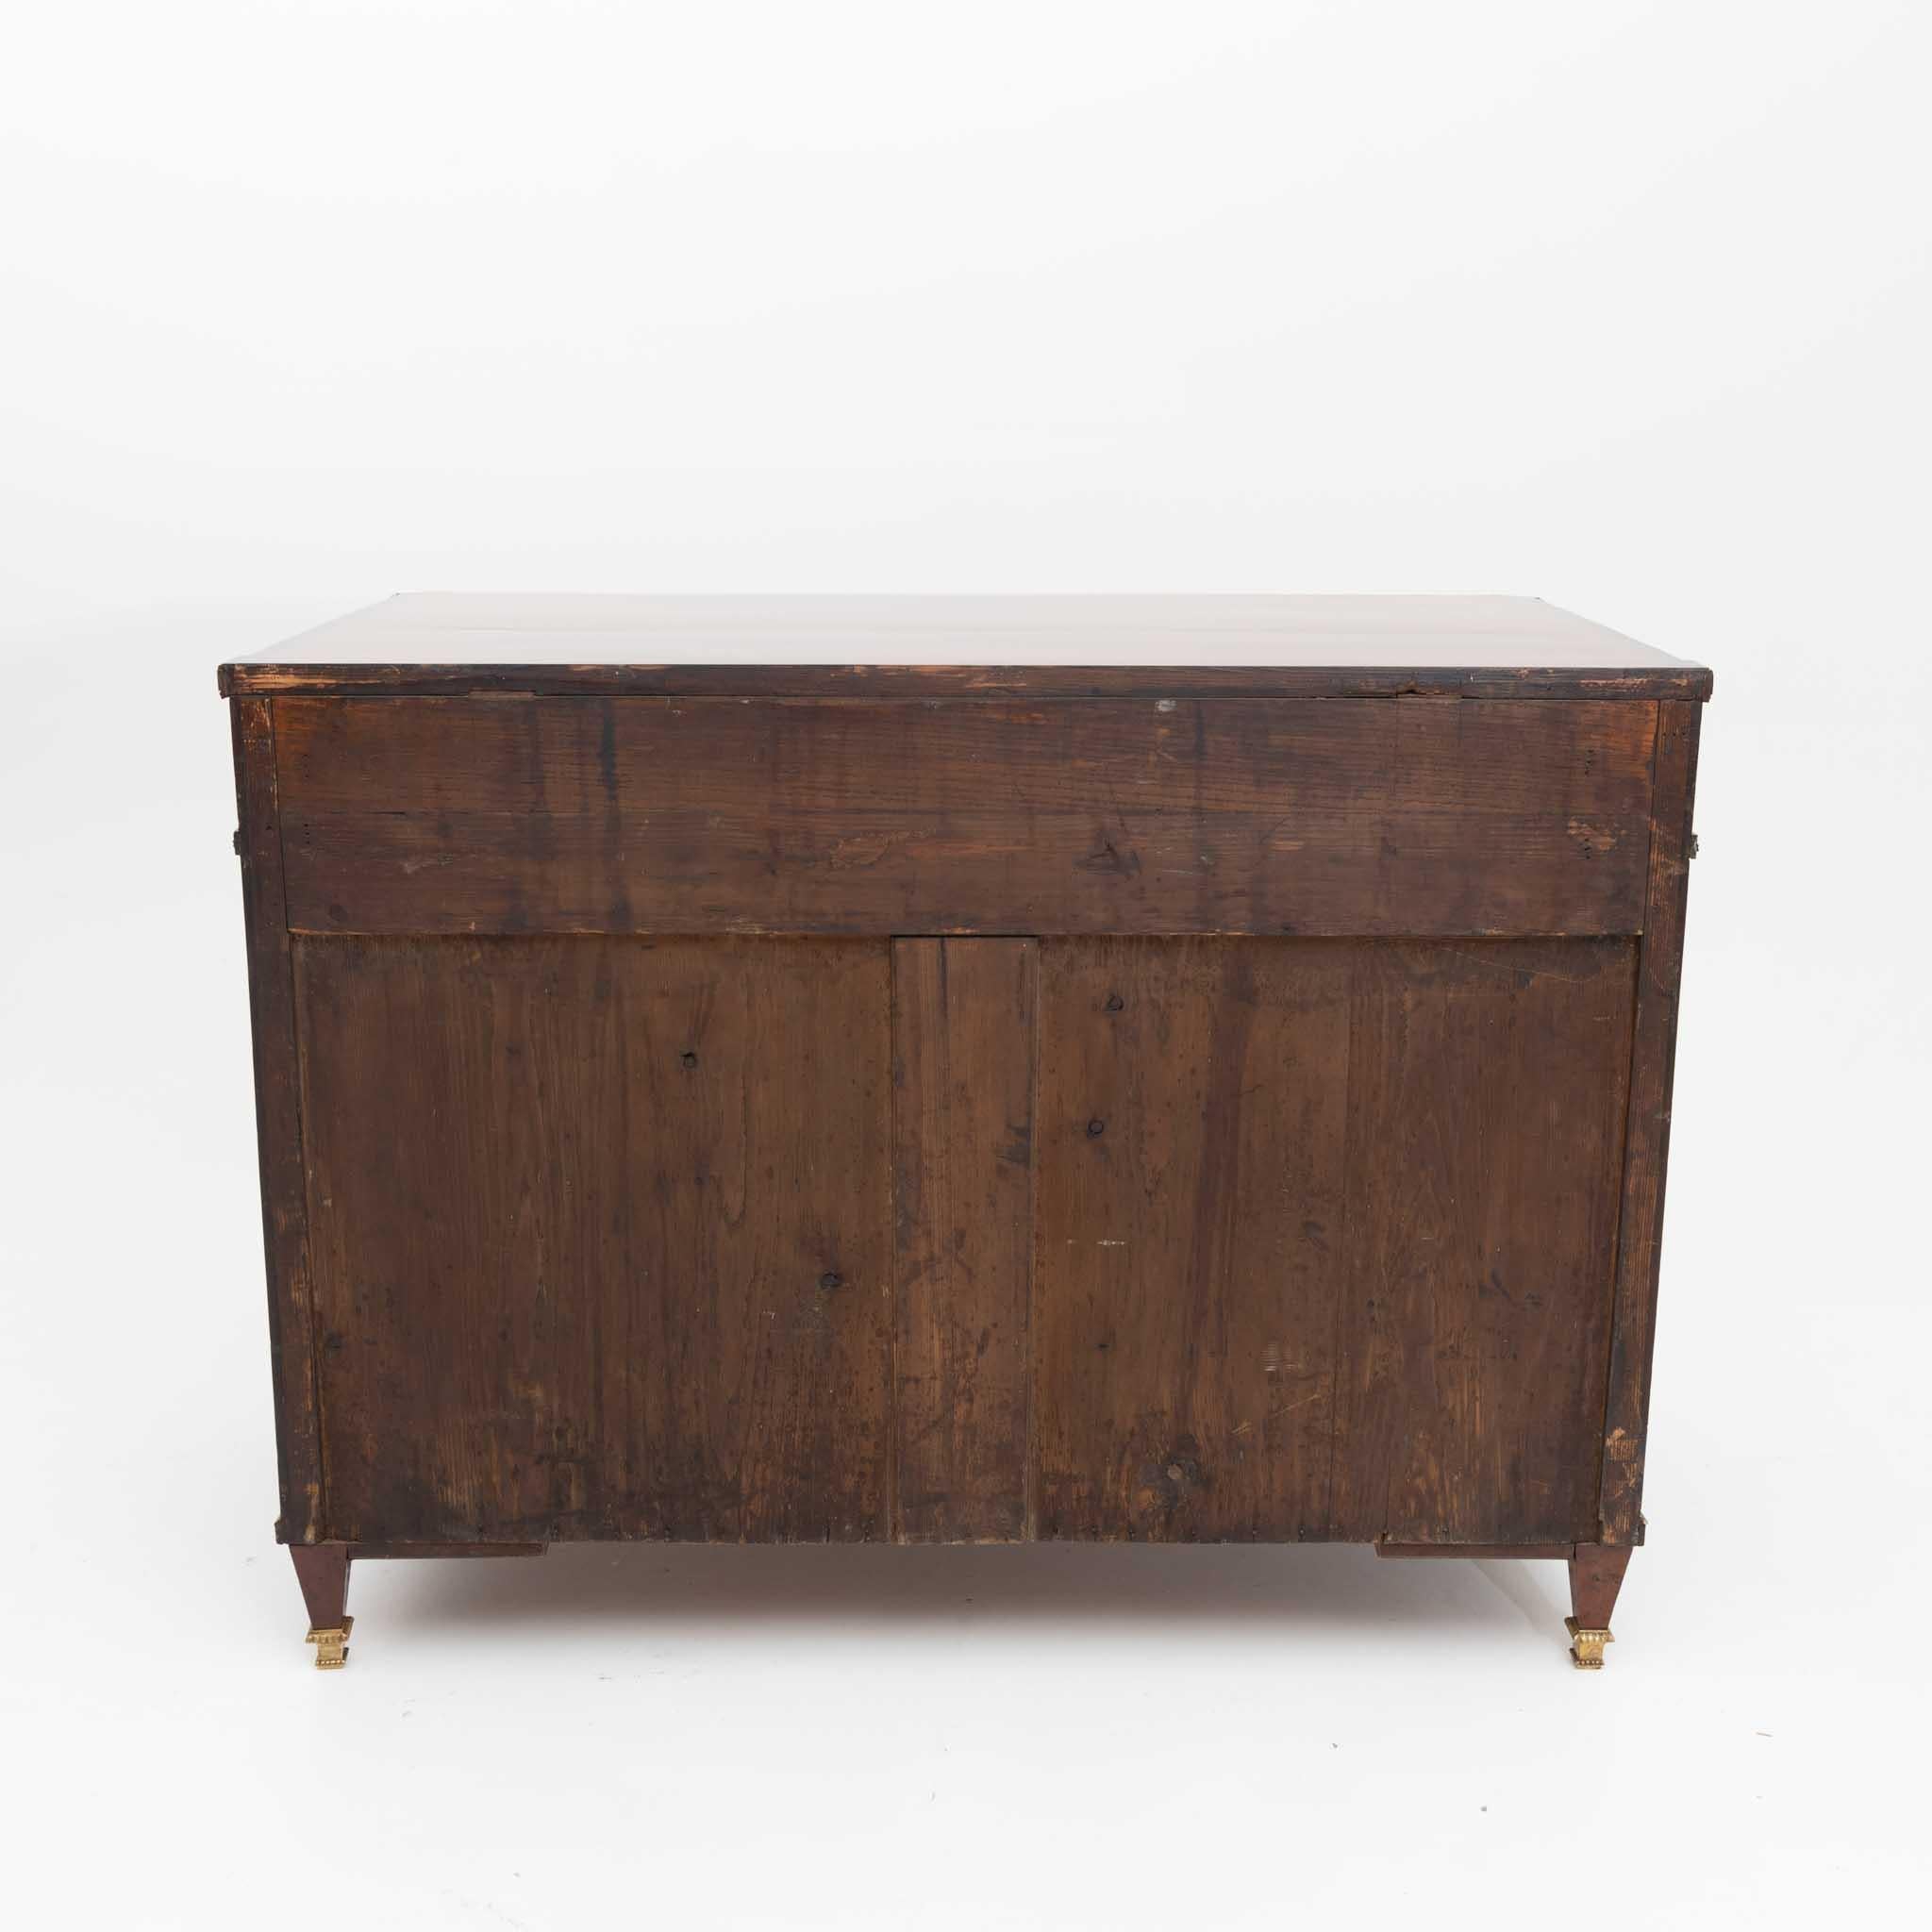 Two-door sideboard on square-pointed feet with brass sabots, brass moldings and inlaid upper drawer with leaf motifs and diamond décor. The sideboard was restored and hand polished. Mahogany veneered. 